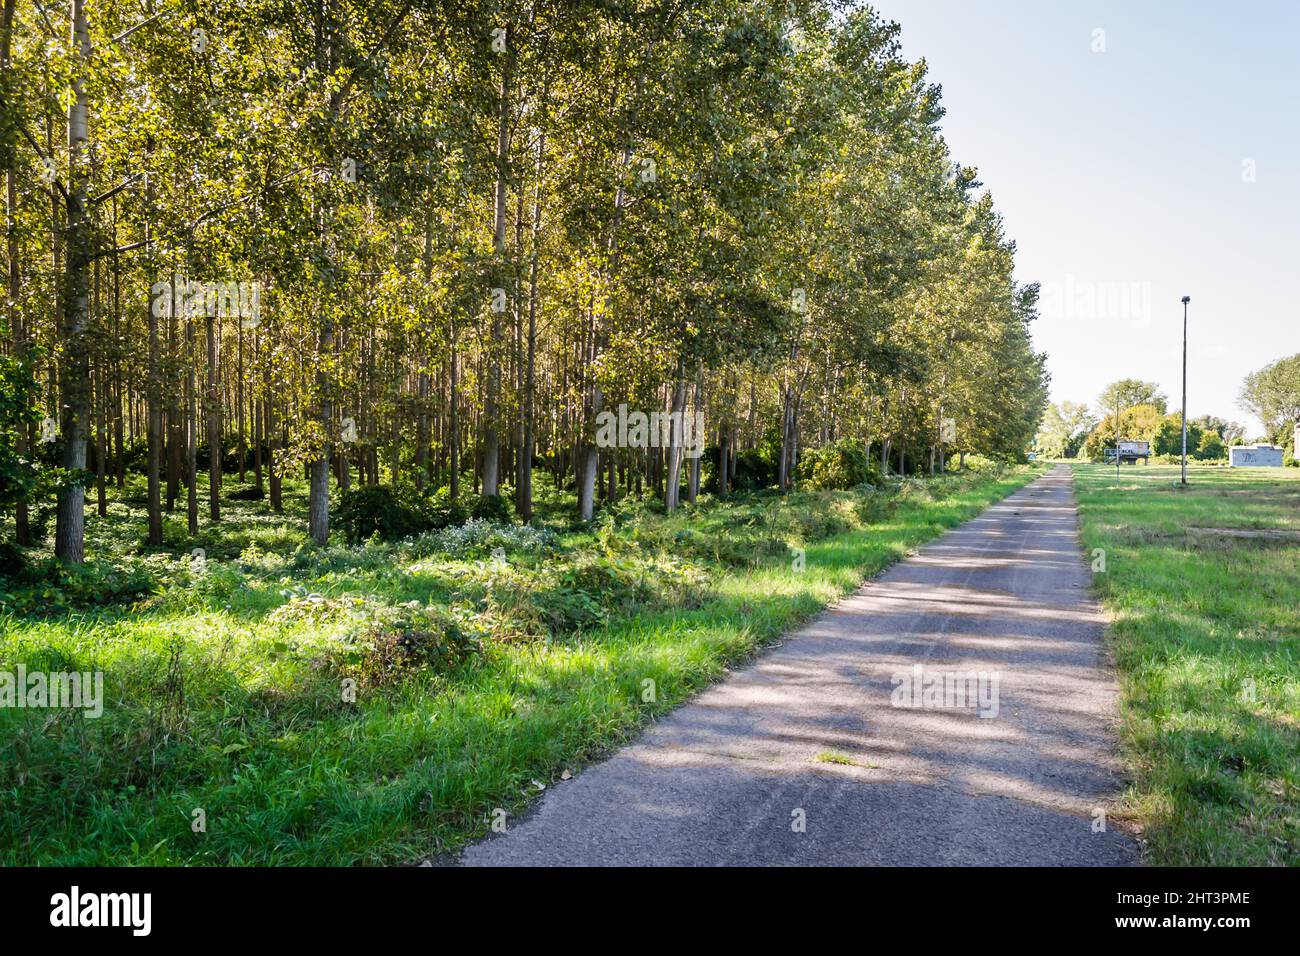 The road next to the Young Green Forest of Topola trees, illuminated by the summer morning sun. Stock Photo